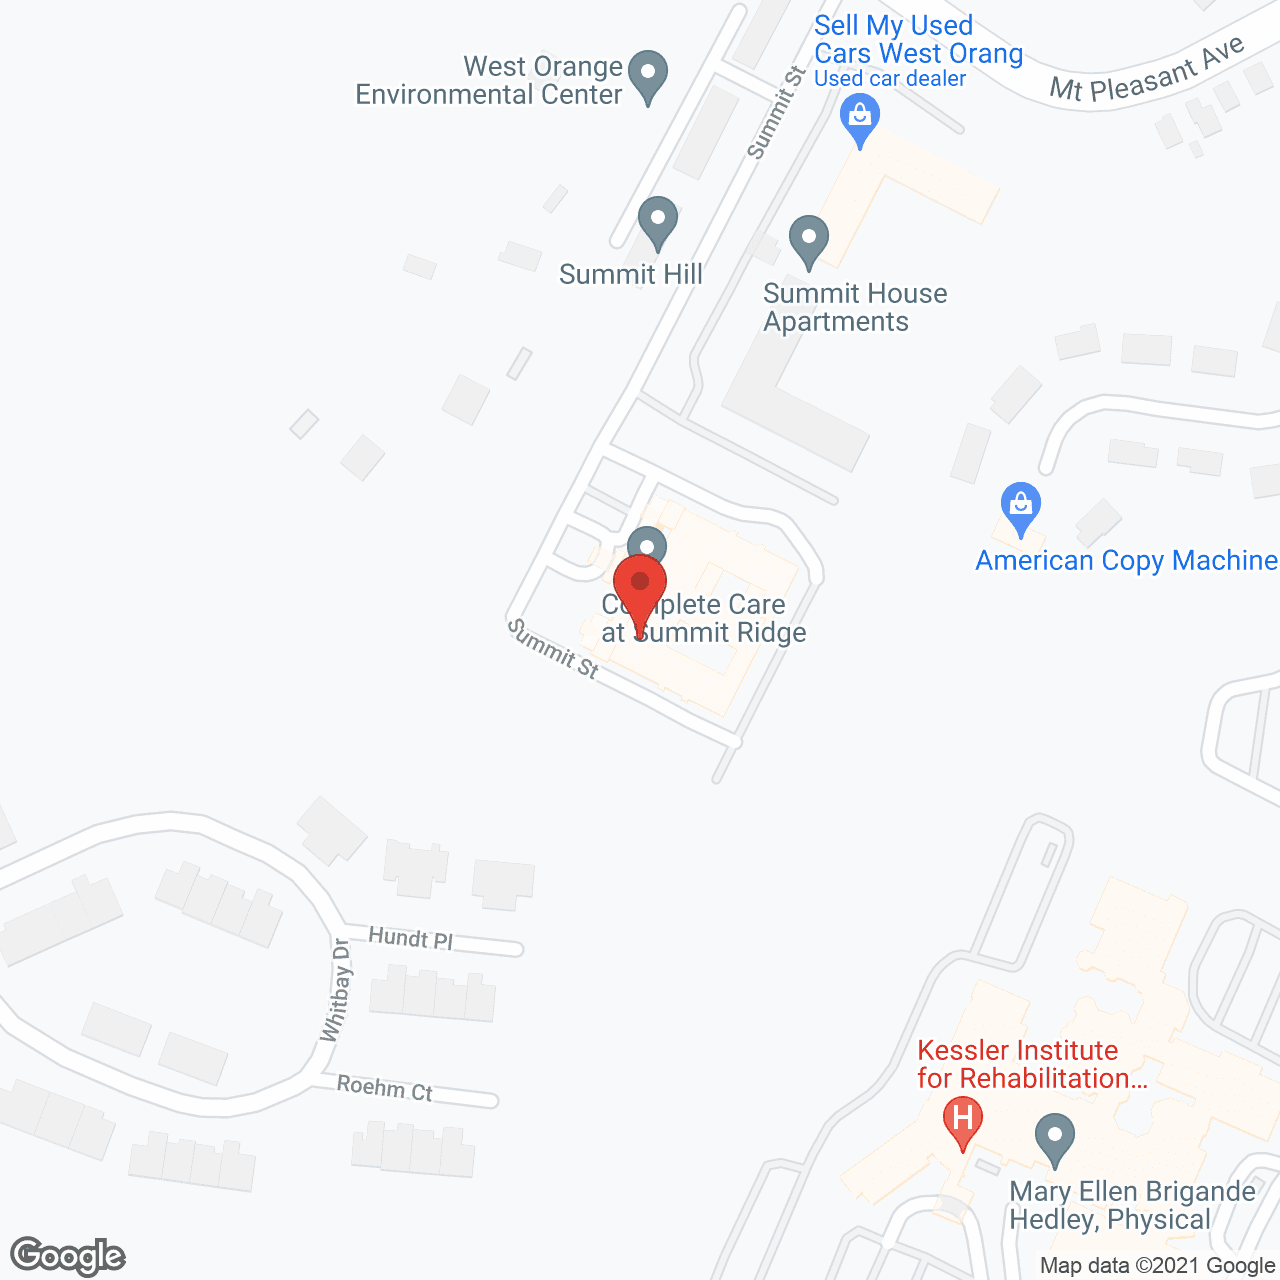 Complete Care at Summit Ridge in google map